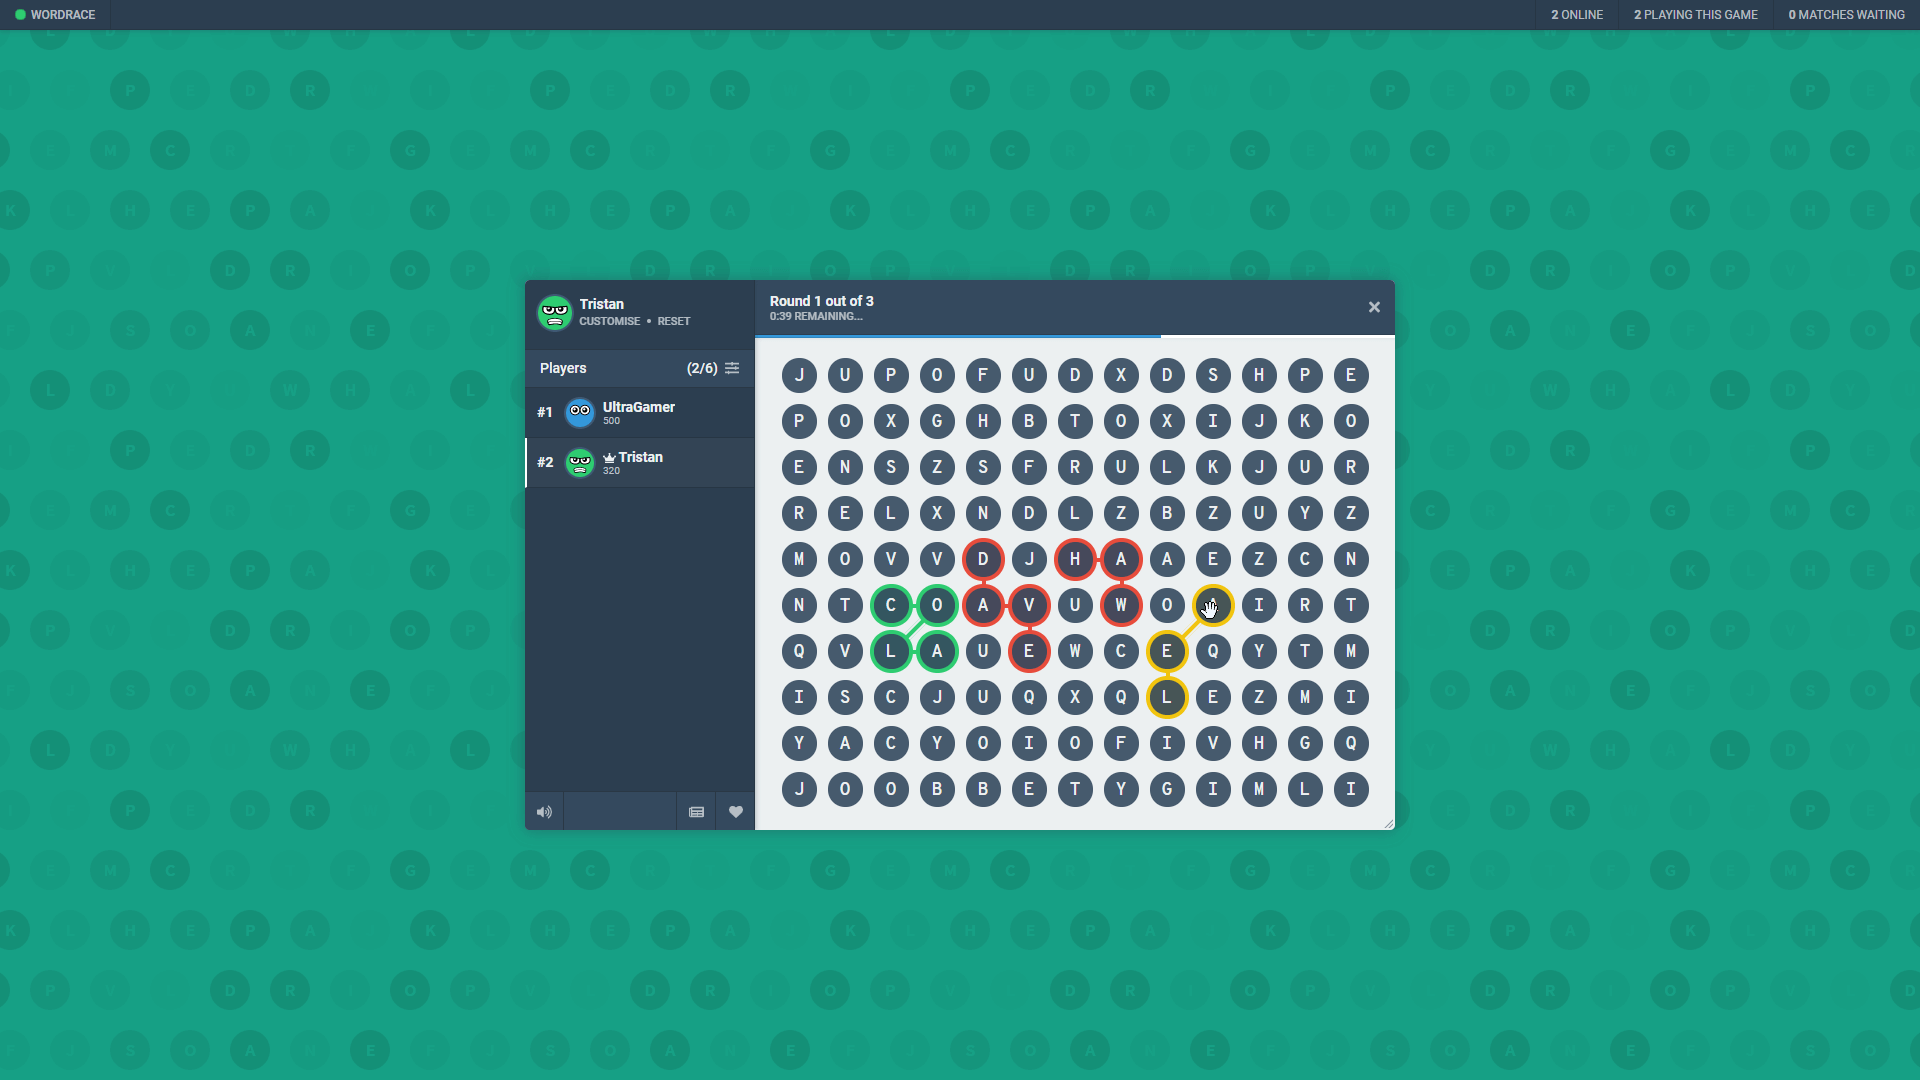 A screenshot of the Wordrace game on Bloob.io, showing what the gameplay experience is like.